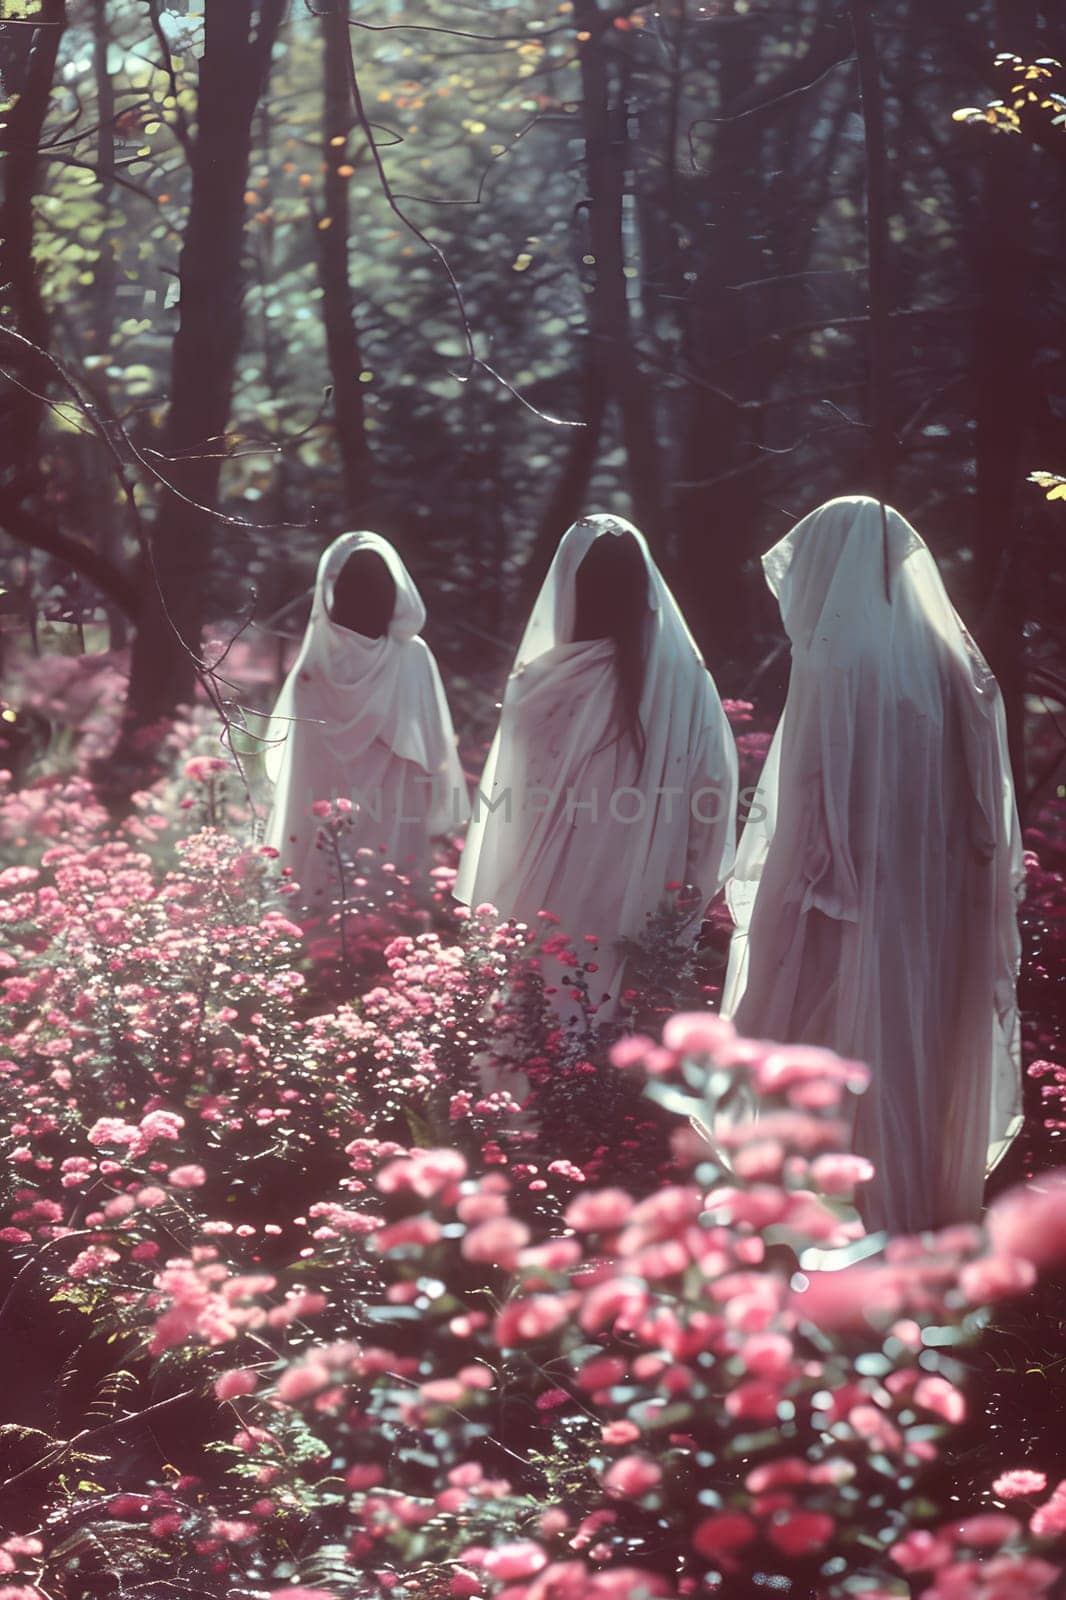 Three women in white robes are strolling through a meadow of pink flowers, surrounded by lush greenery and tall trees. They appear blissful and at peace in the natural landscape